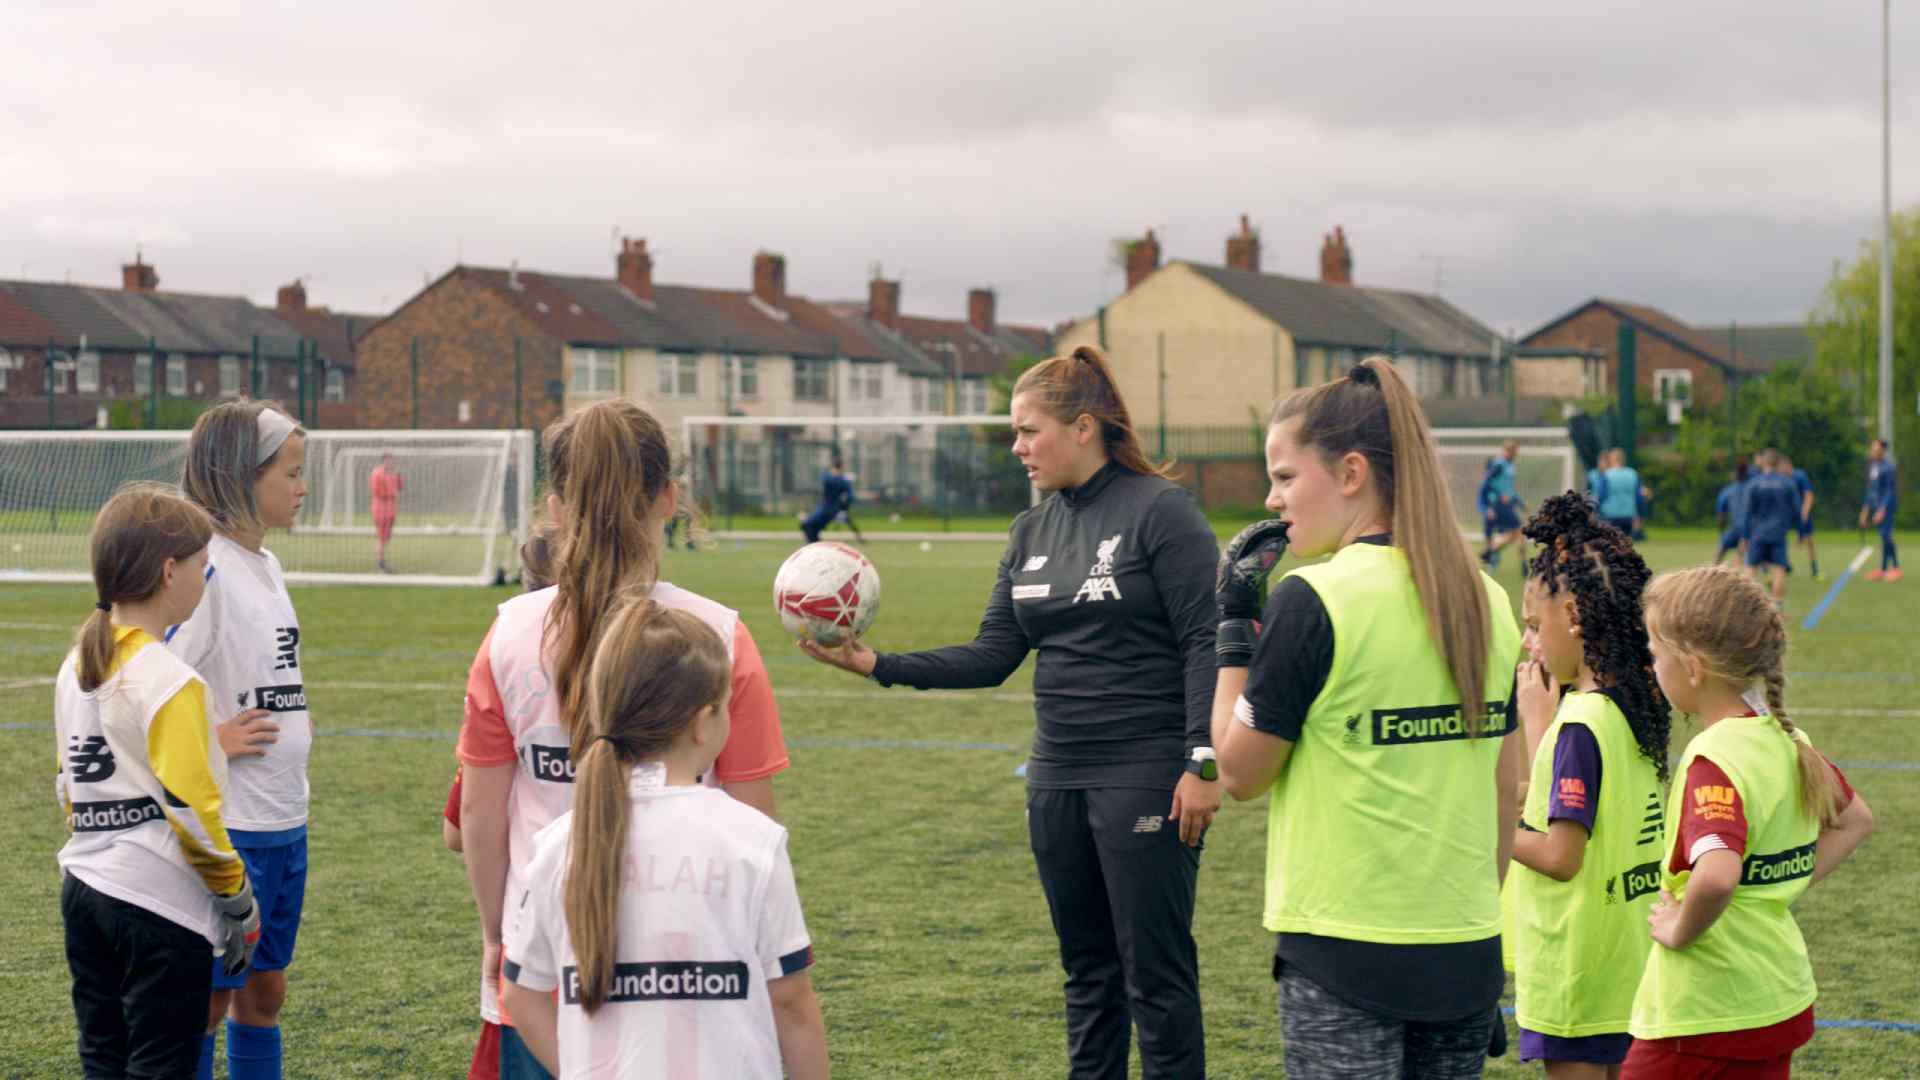 Liverpool Football Club Foundation coach talking to young girls as part of the Head Coaches programme in partnership with AXA UK